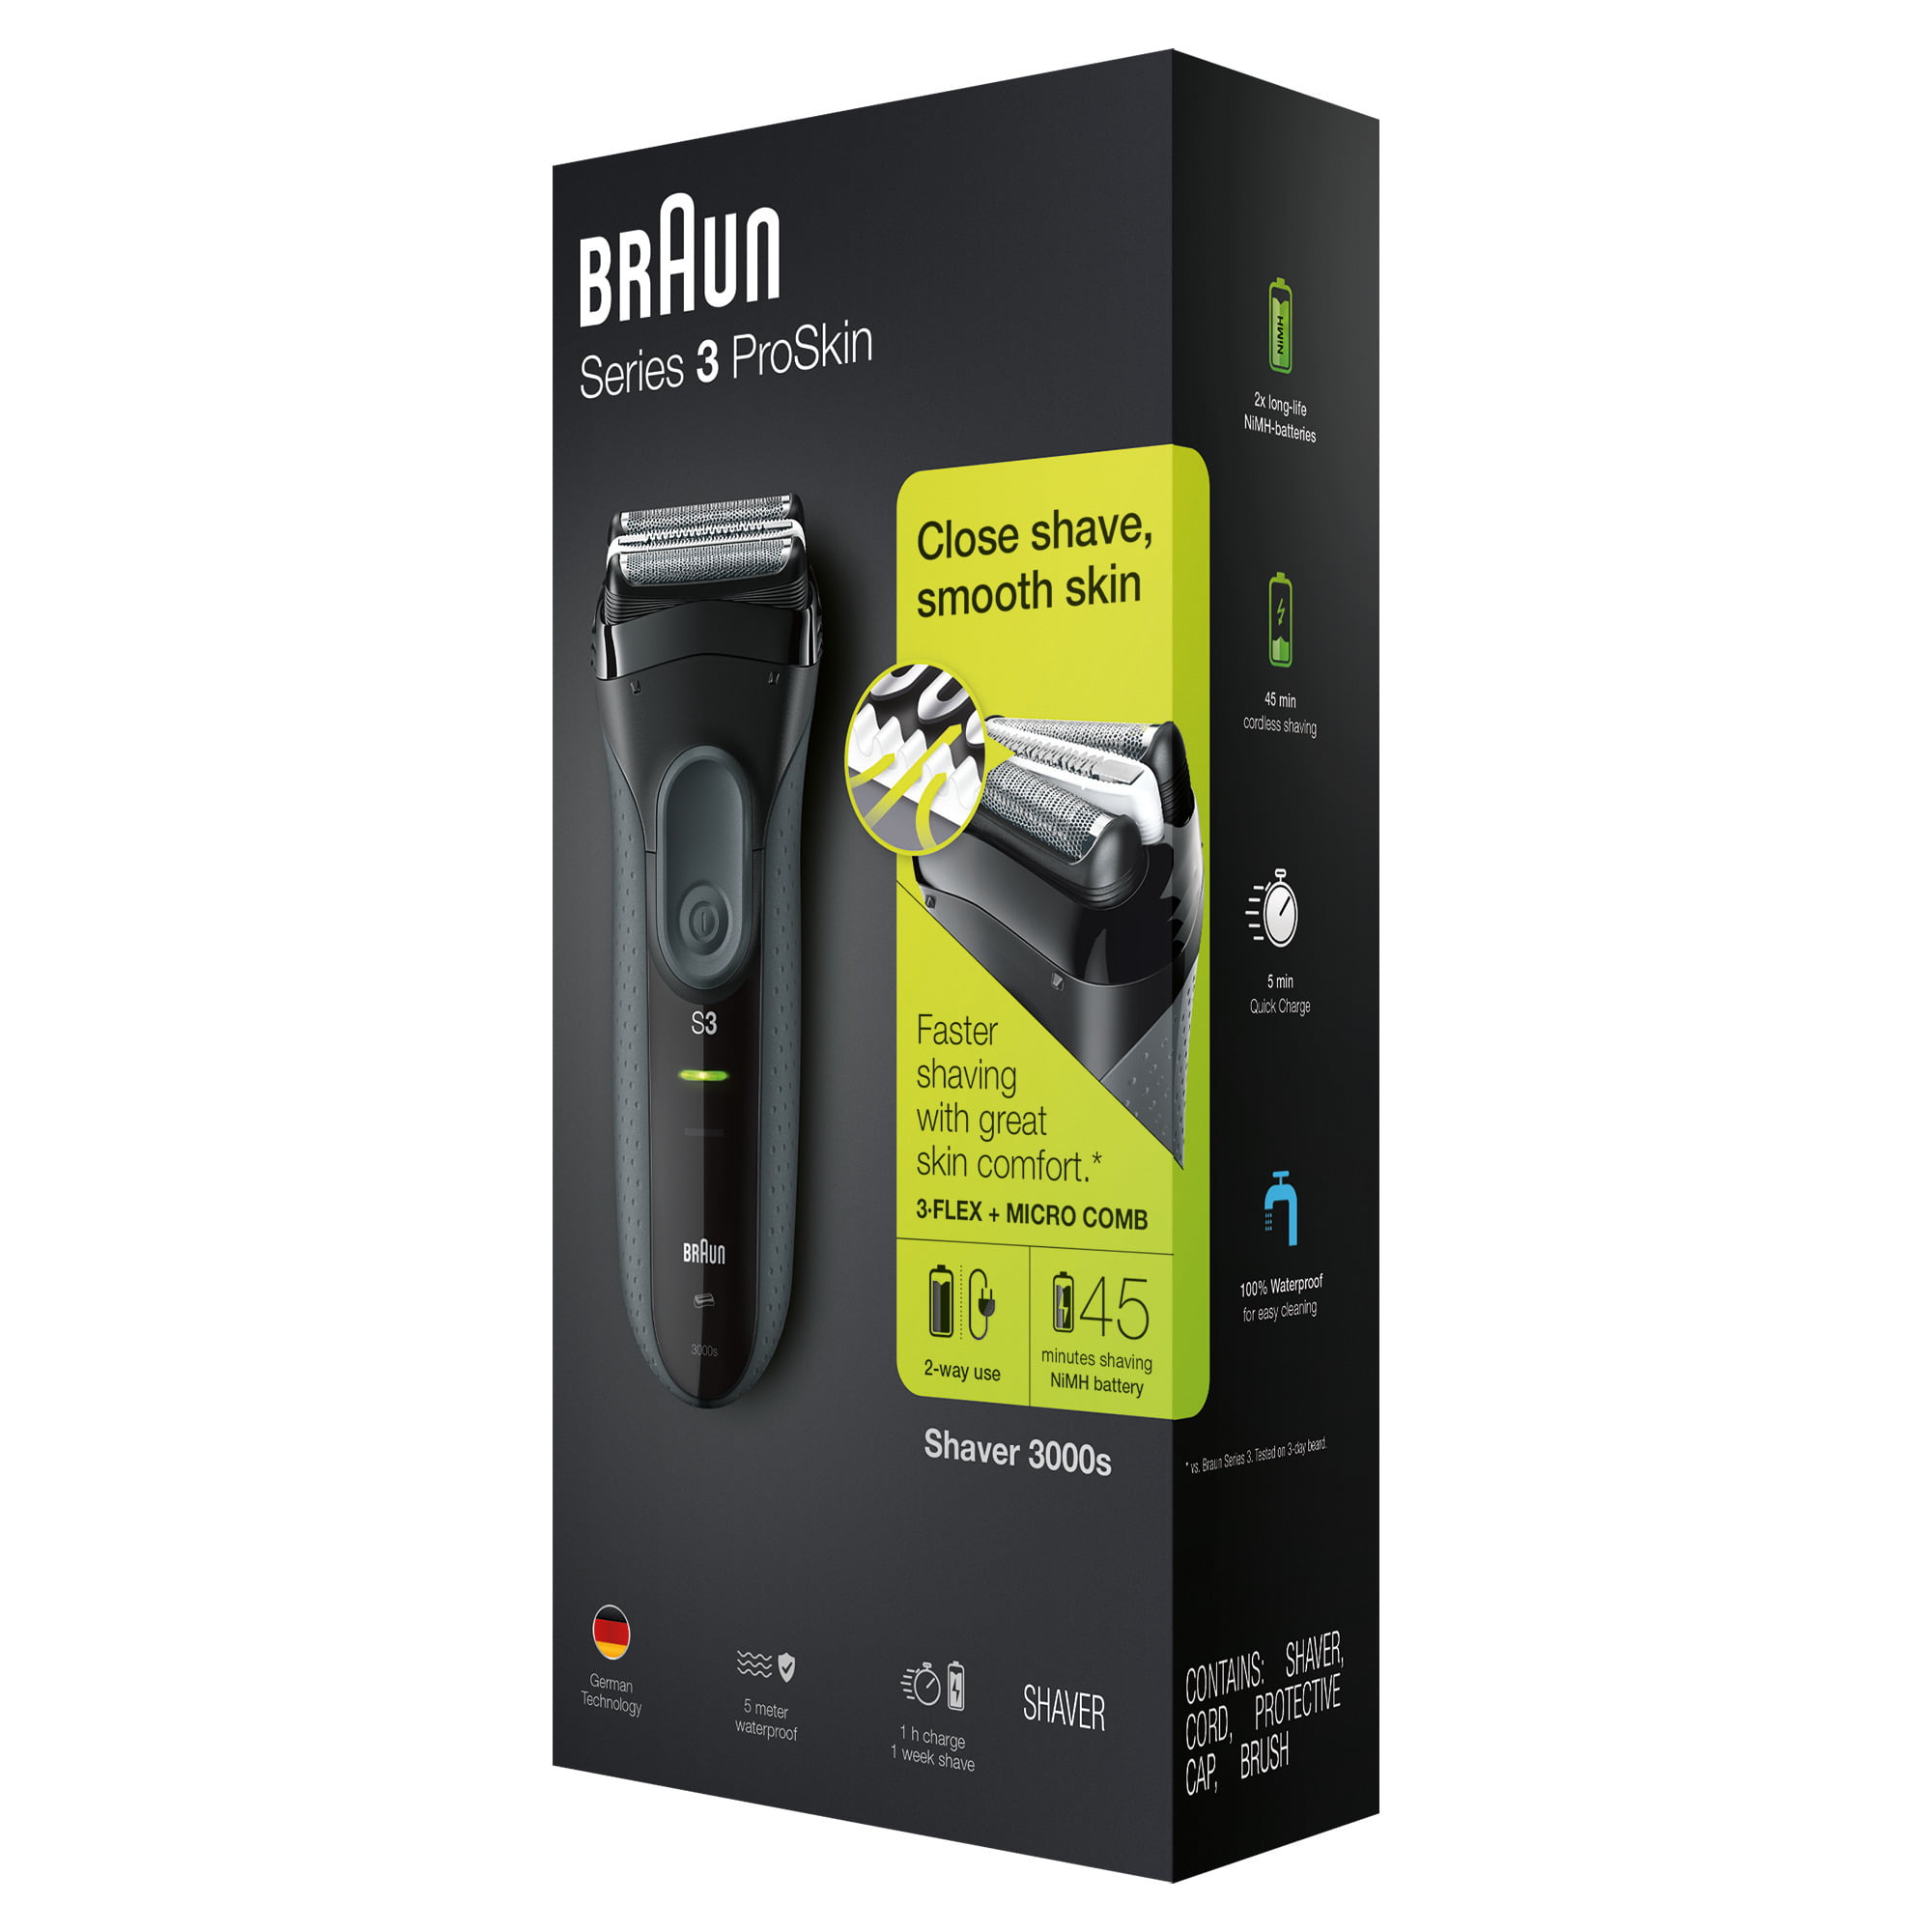 Braun Series 3 ProSkin 3000s Shaver for Men/Rechargeable Electric Razor, Black -